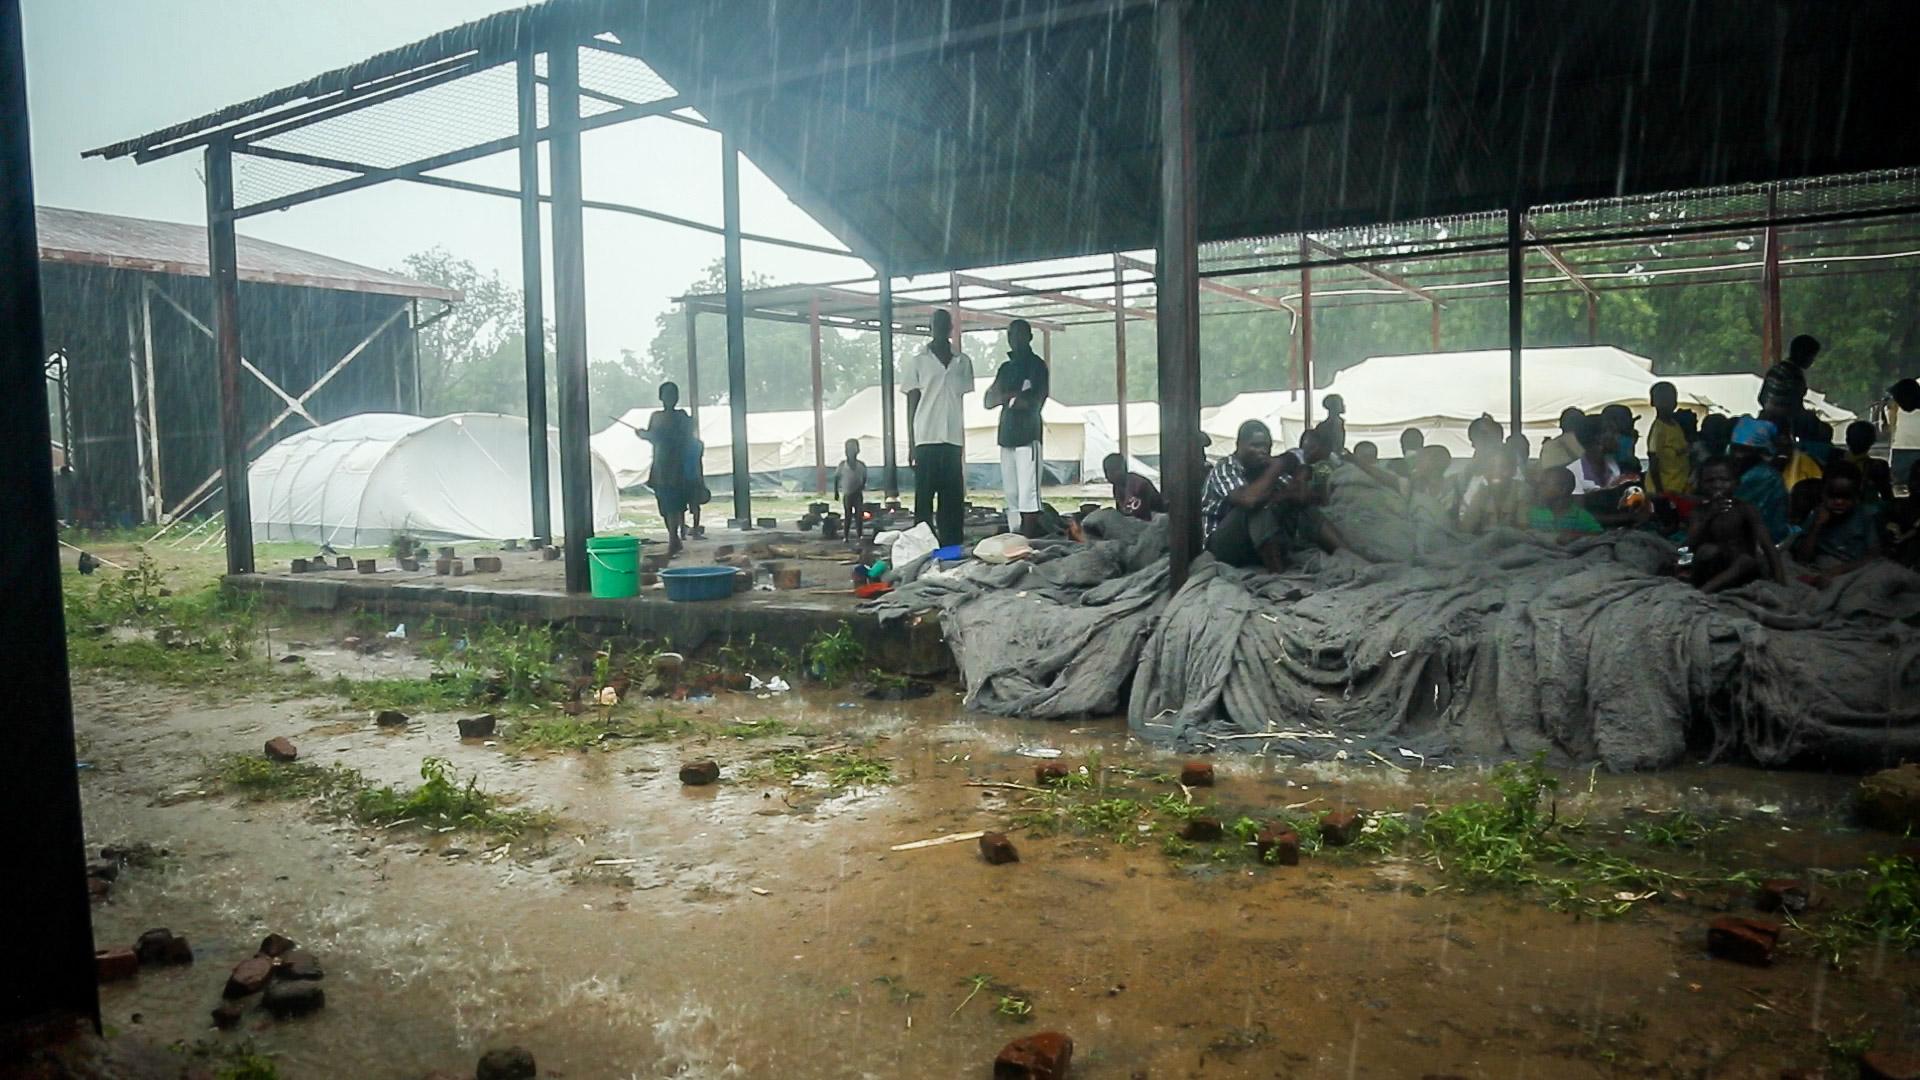 Malawians evacuated after devastating floods in late January wait out another deluge at a makeshift shelter. As many as 200,000 people have been displaced and crops were destroyed by what the country's president says is the worst flooding in its history.